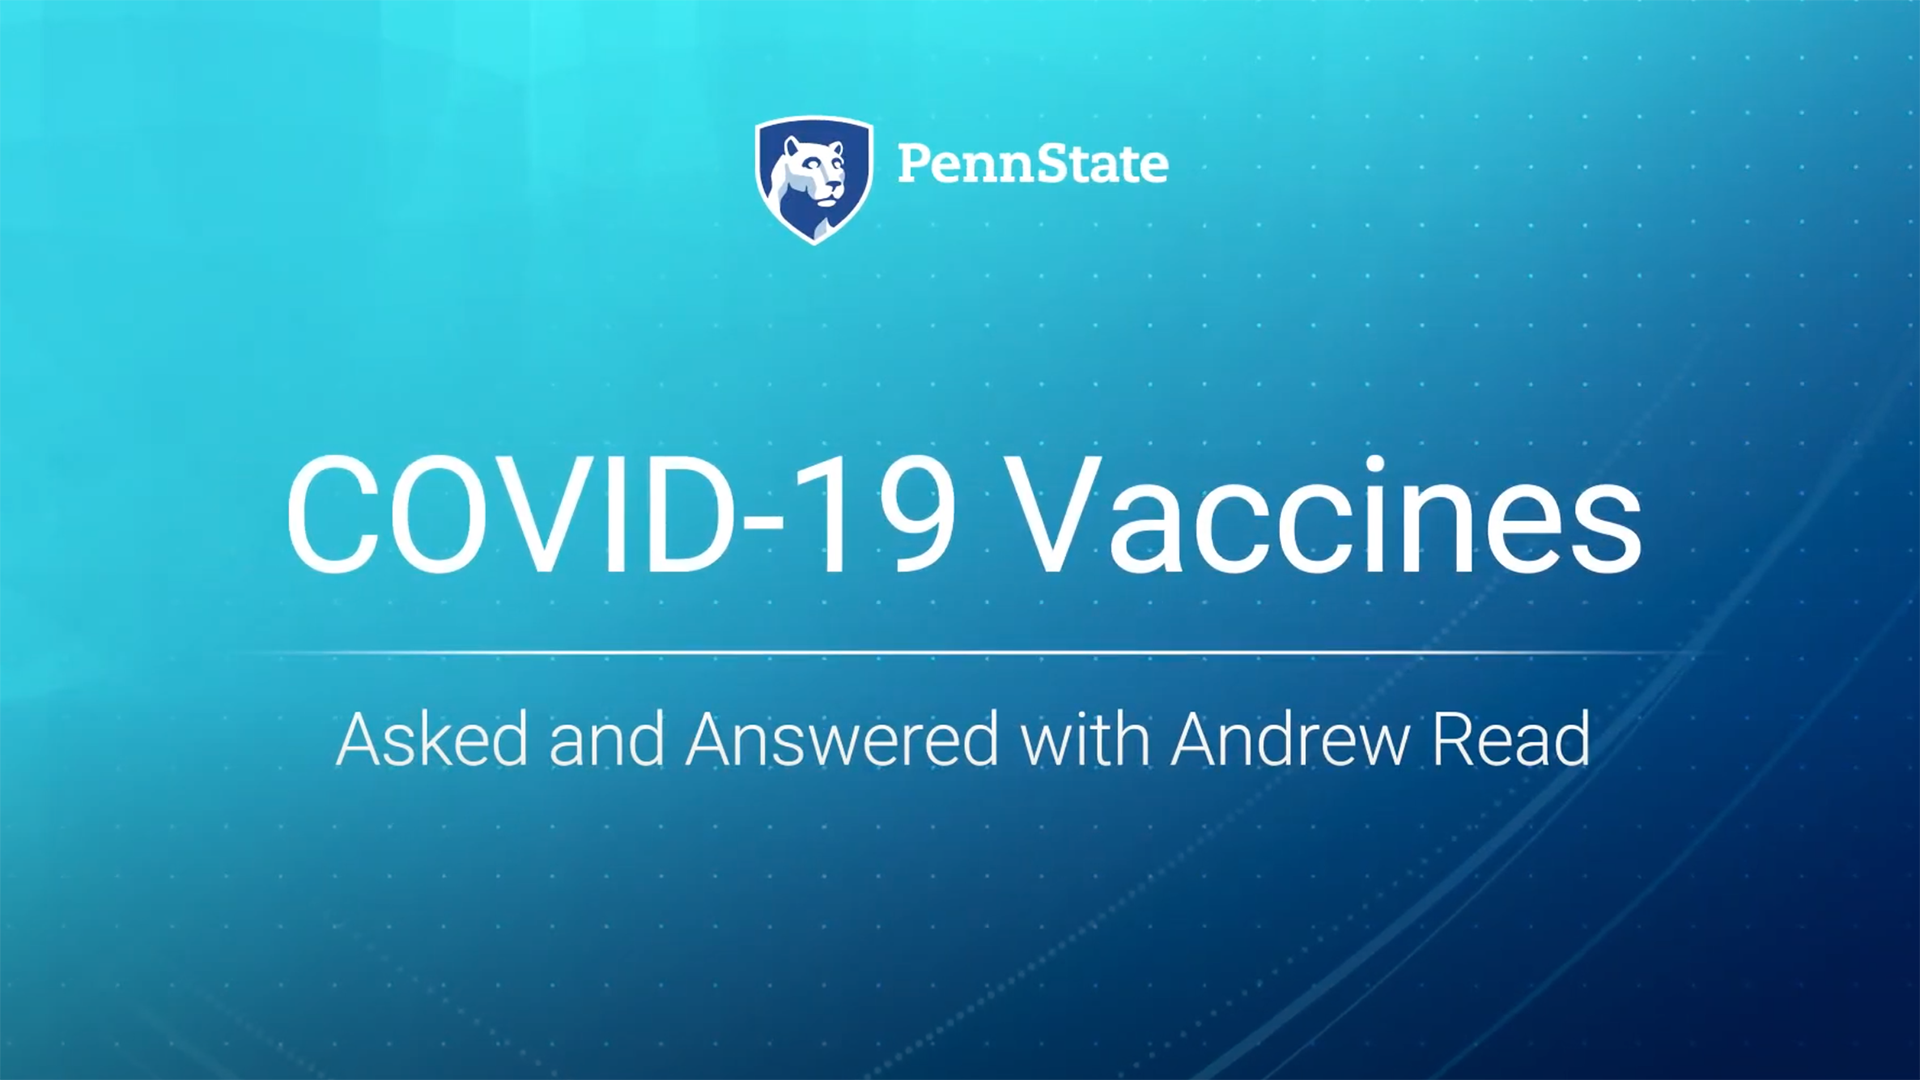 Text reading: Penn State. COVID-19 Vaccines. Asked and Answered with Andrew Read.